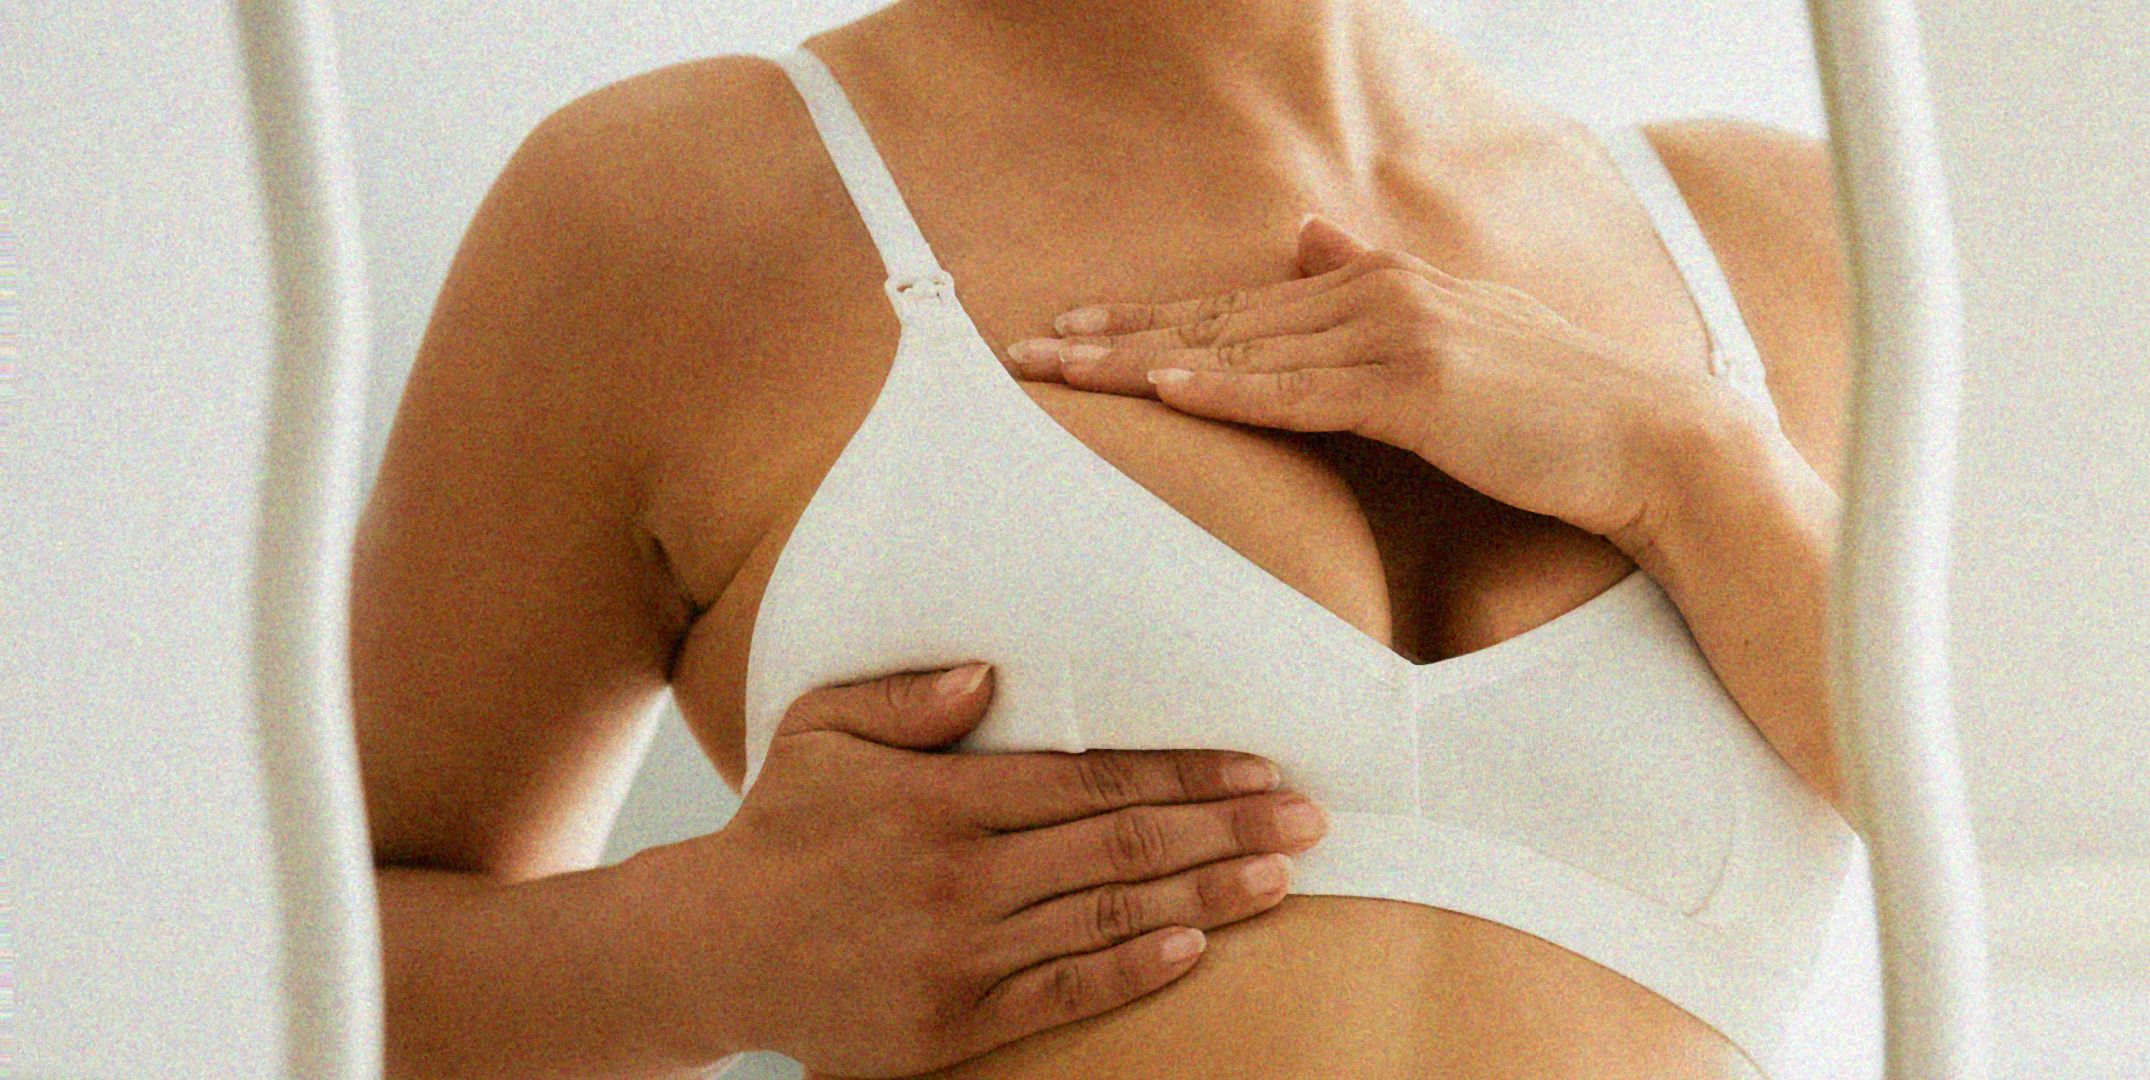 How to check boobs for breast cancer: lumps and other symptoms